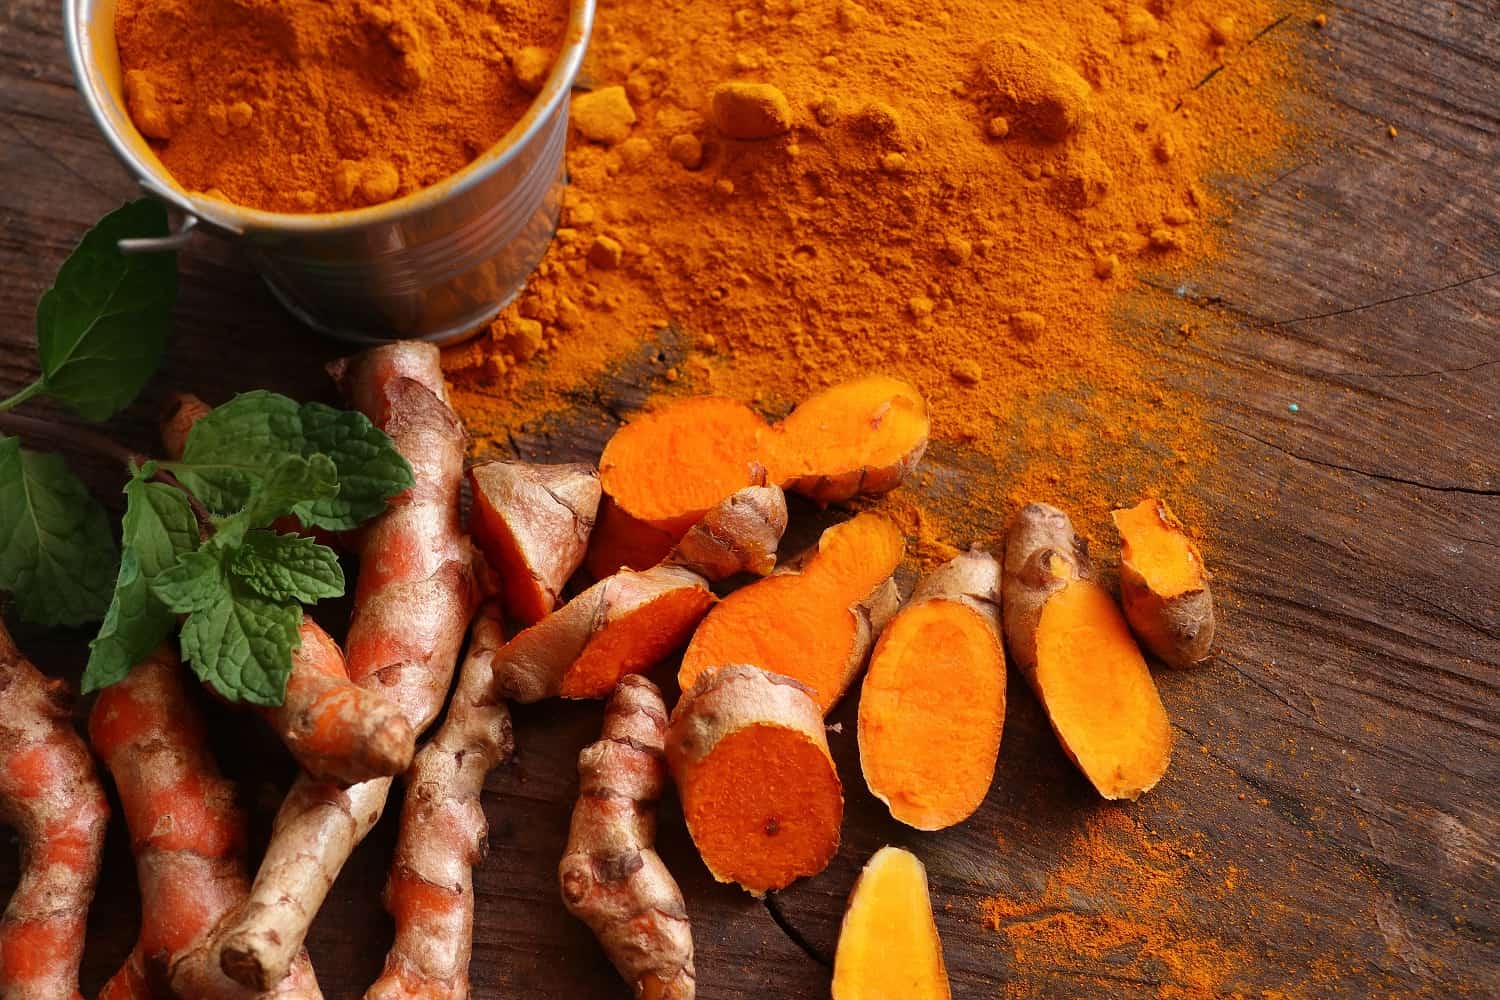 Turmeric: Is It Really a Superfood?